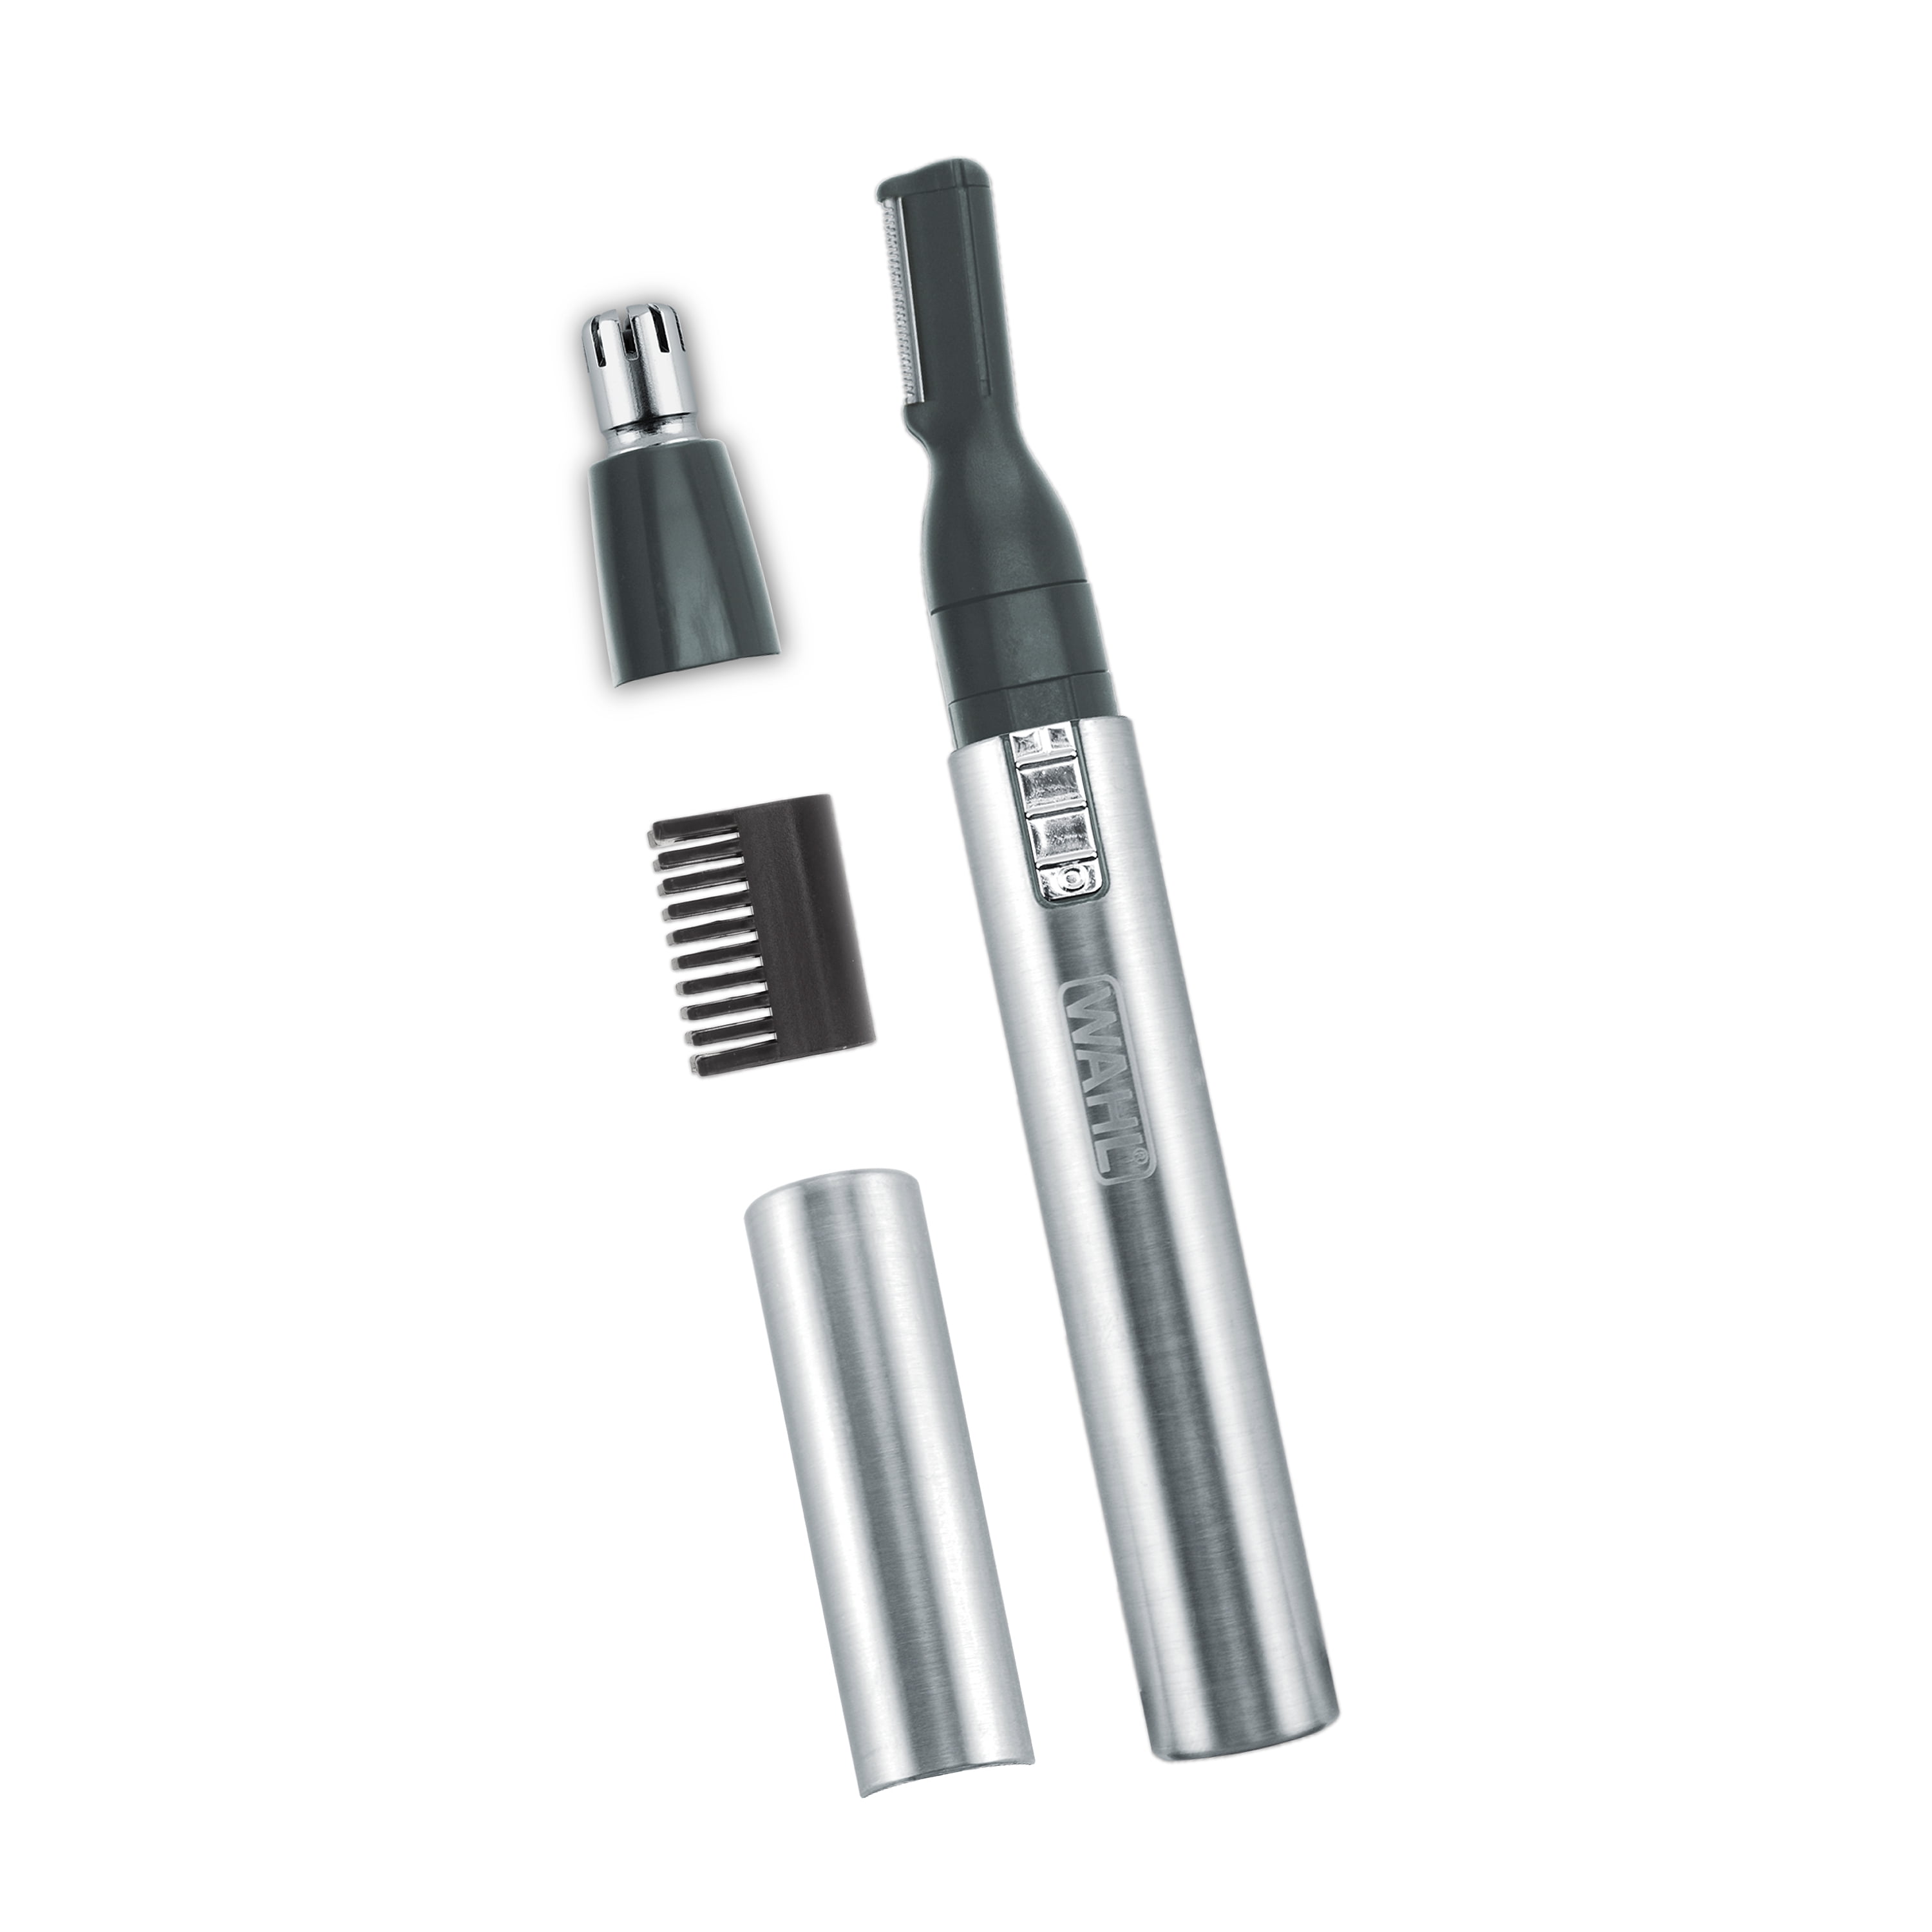 wahl 5640 micro trimmer